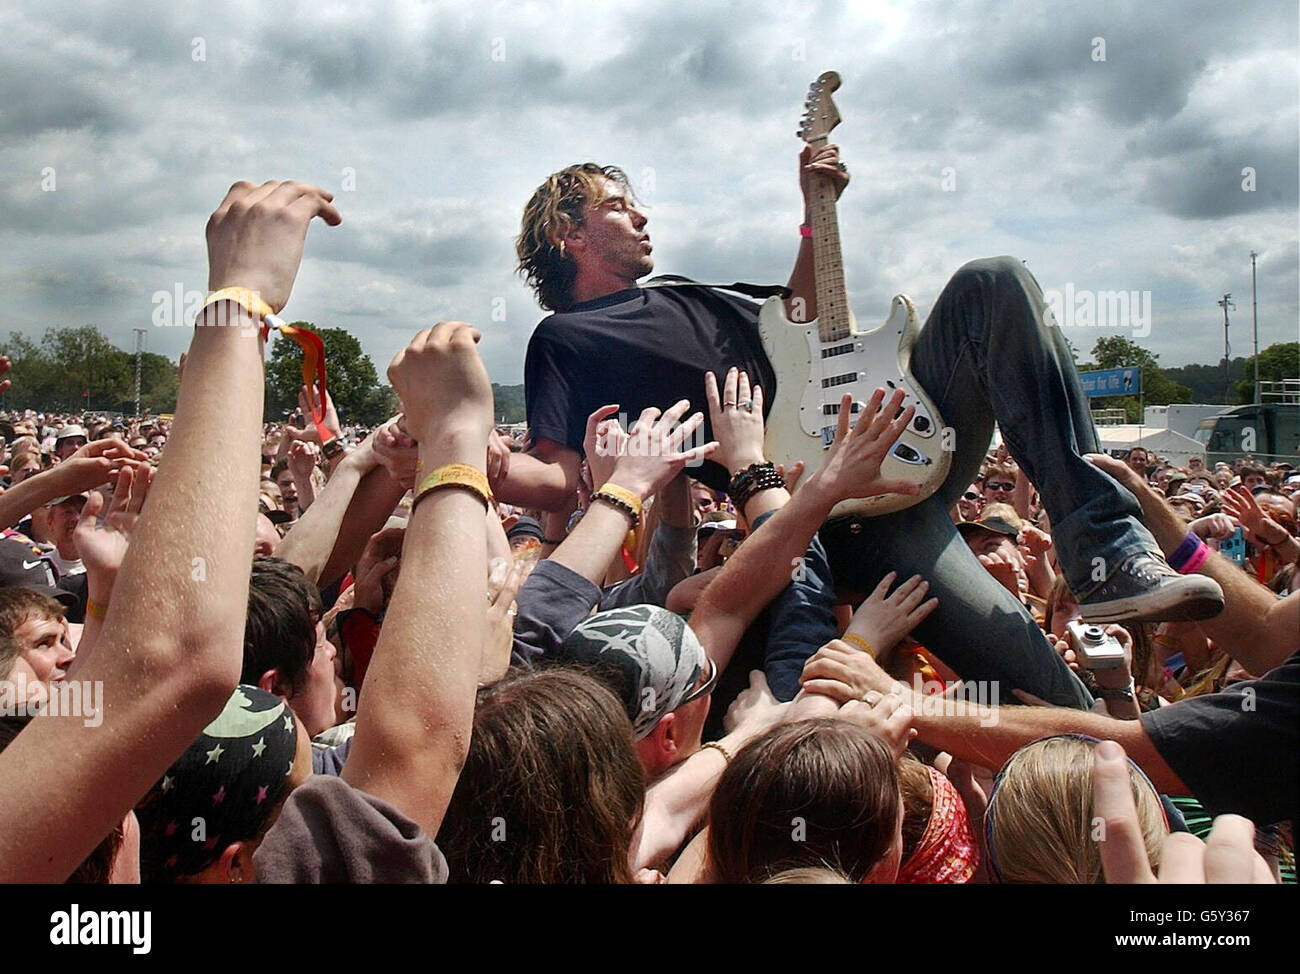 Gavin Rossdale of band, Bush, plays in the crowd at the Glastonbury Festival, at Pilton , Somerset. The festival is a complete sell out, and the weather forecast looks good for the thousands of music fans at the site. * As usual, a huge security operation is in force at the festival, with millions of pounds spent on security fencing to stop non-ticket holders breaking in. Stock Photo